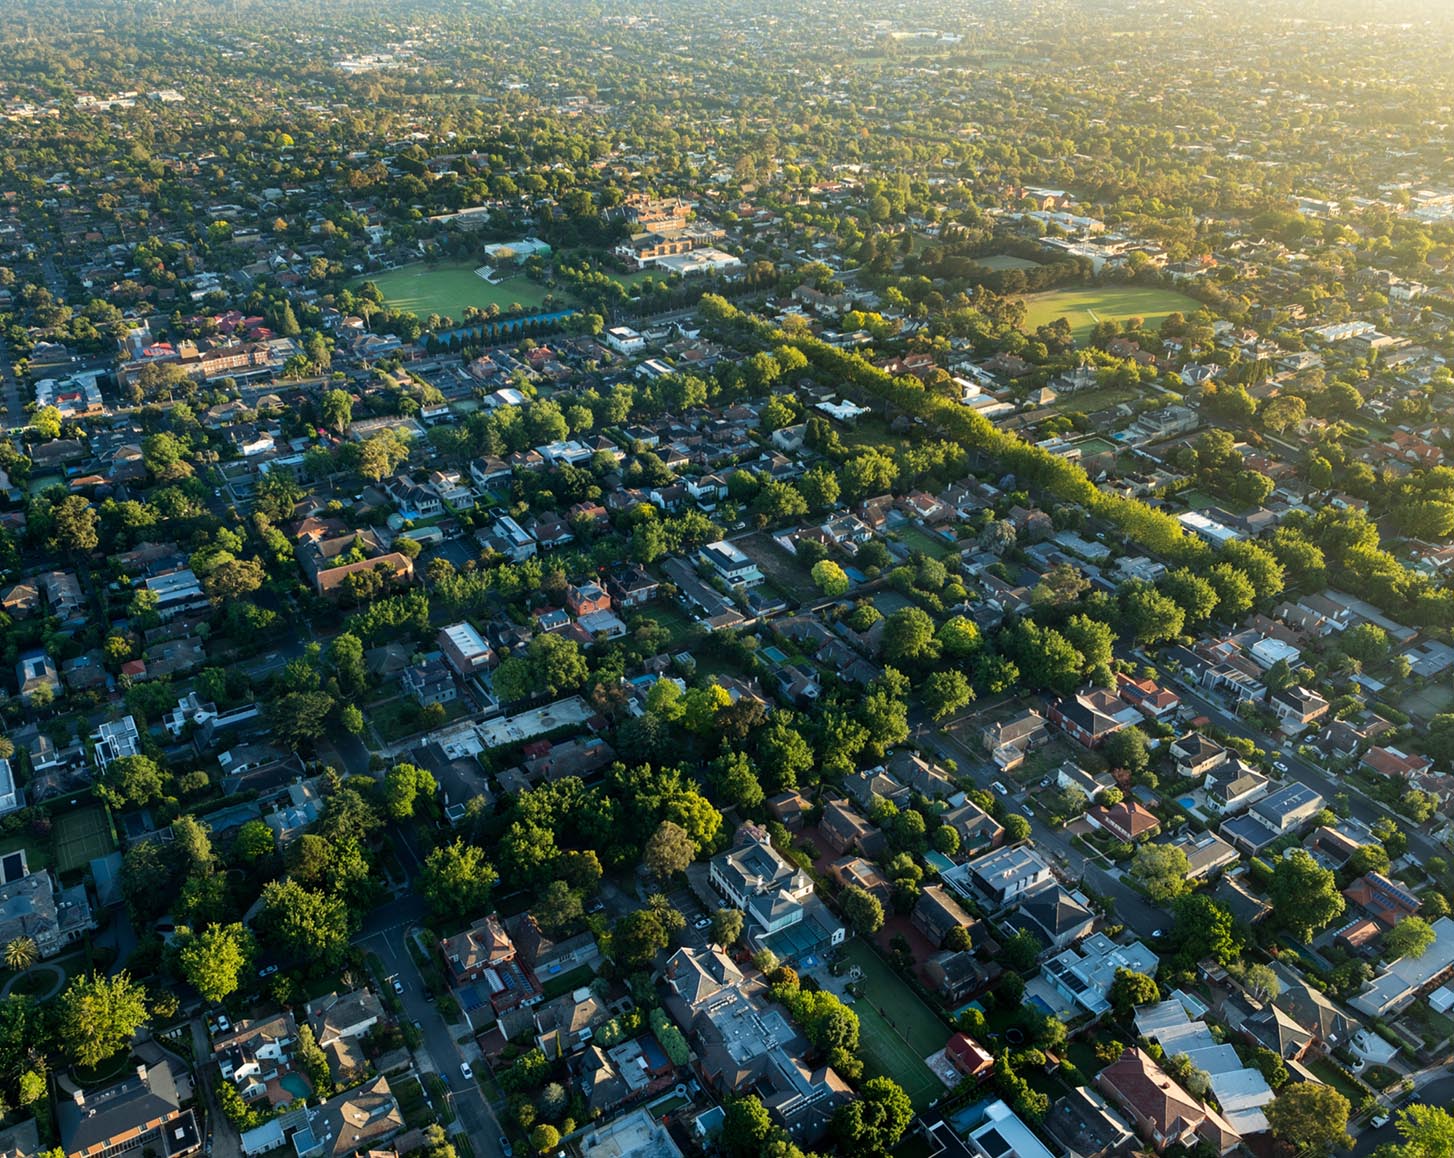 Birds-eye view of a residential suburb